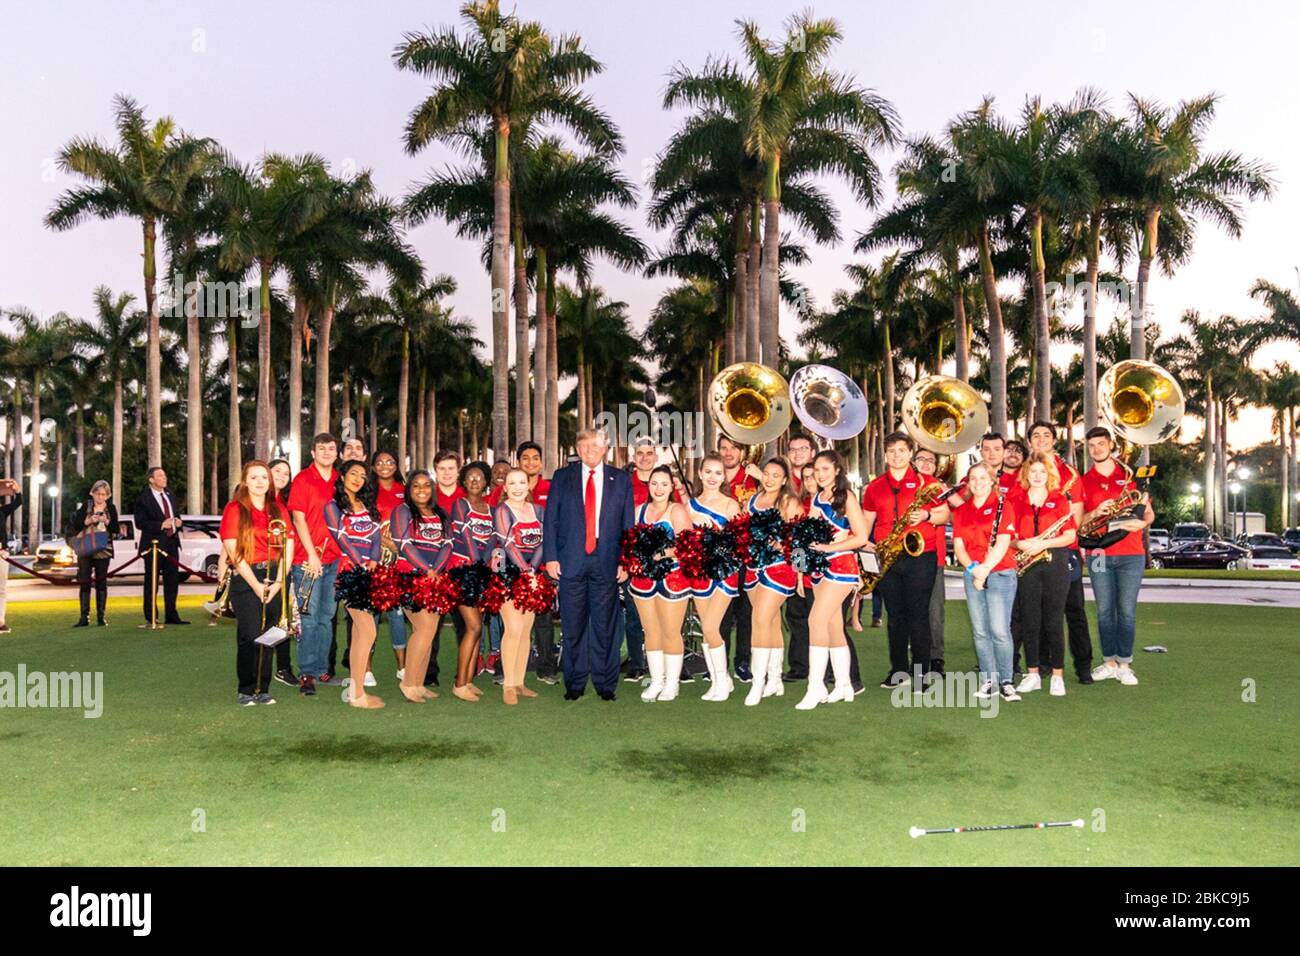 President Donald J. Trump poses for a photo with members of the Florida Atlantic University marching band Sunday evening, Feb. 2, 2020, outside the Trump International Golf Club in West Palm Beach, Fla., prior to attending a Super Bowl party. President Trump and First Lady Melania Trump in Florida Stock Photo